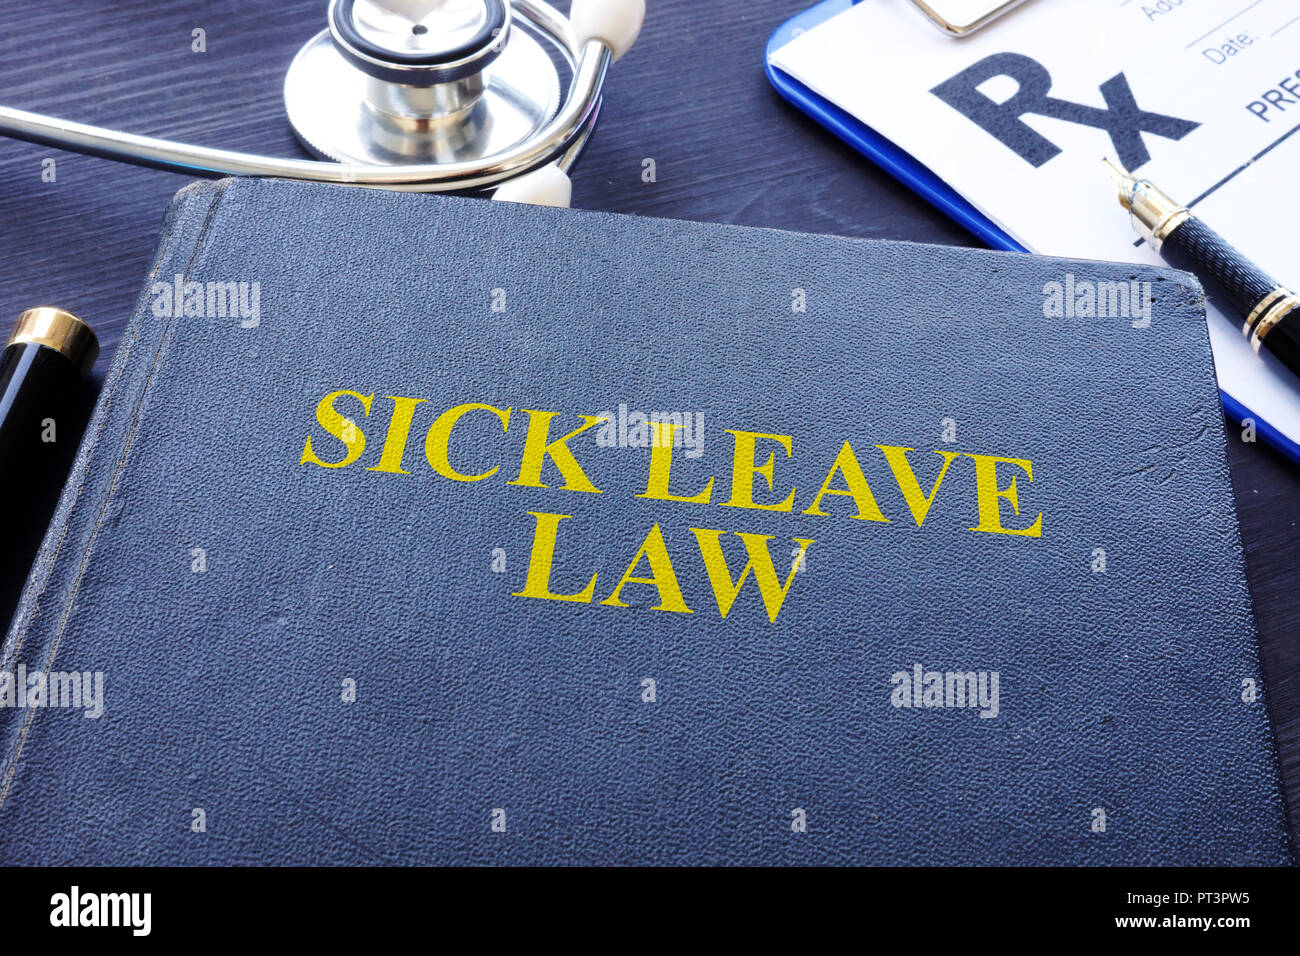 Sick Leave Law book and the stethoscope. Stock Photo